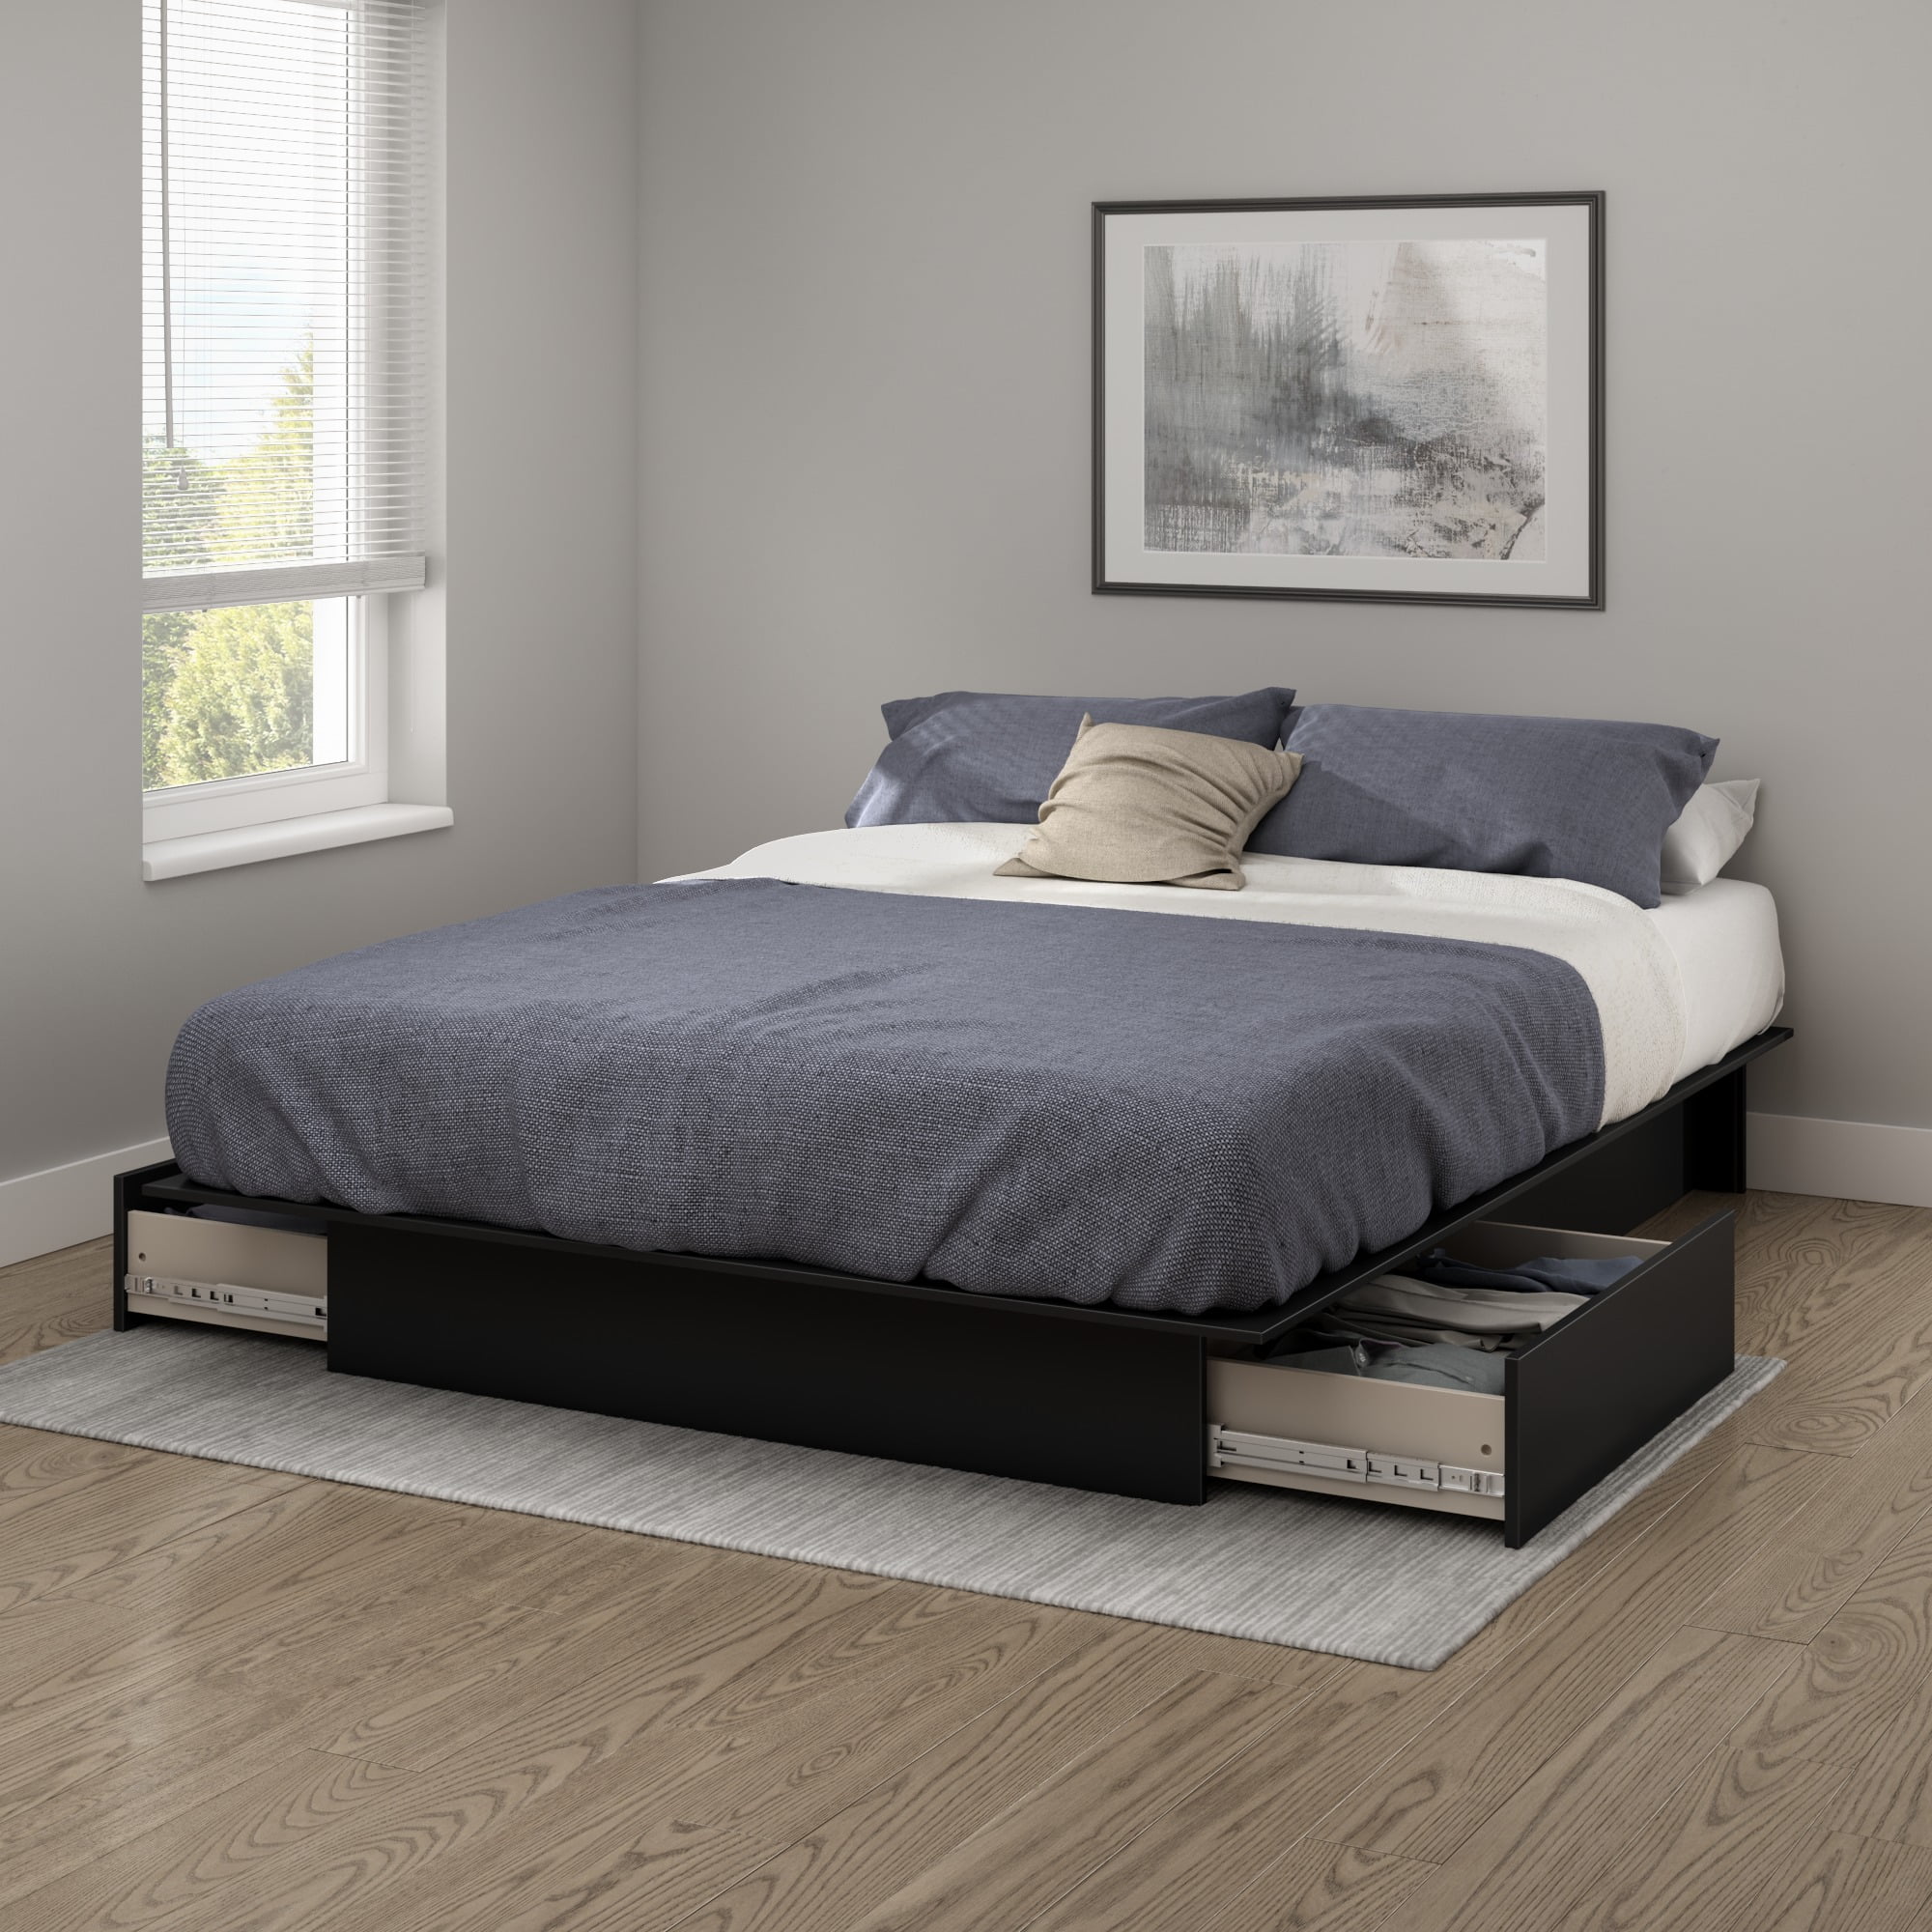 South S Soho Storage Platform Bed, Queen Bed Frame With Storage Boxes